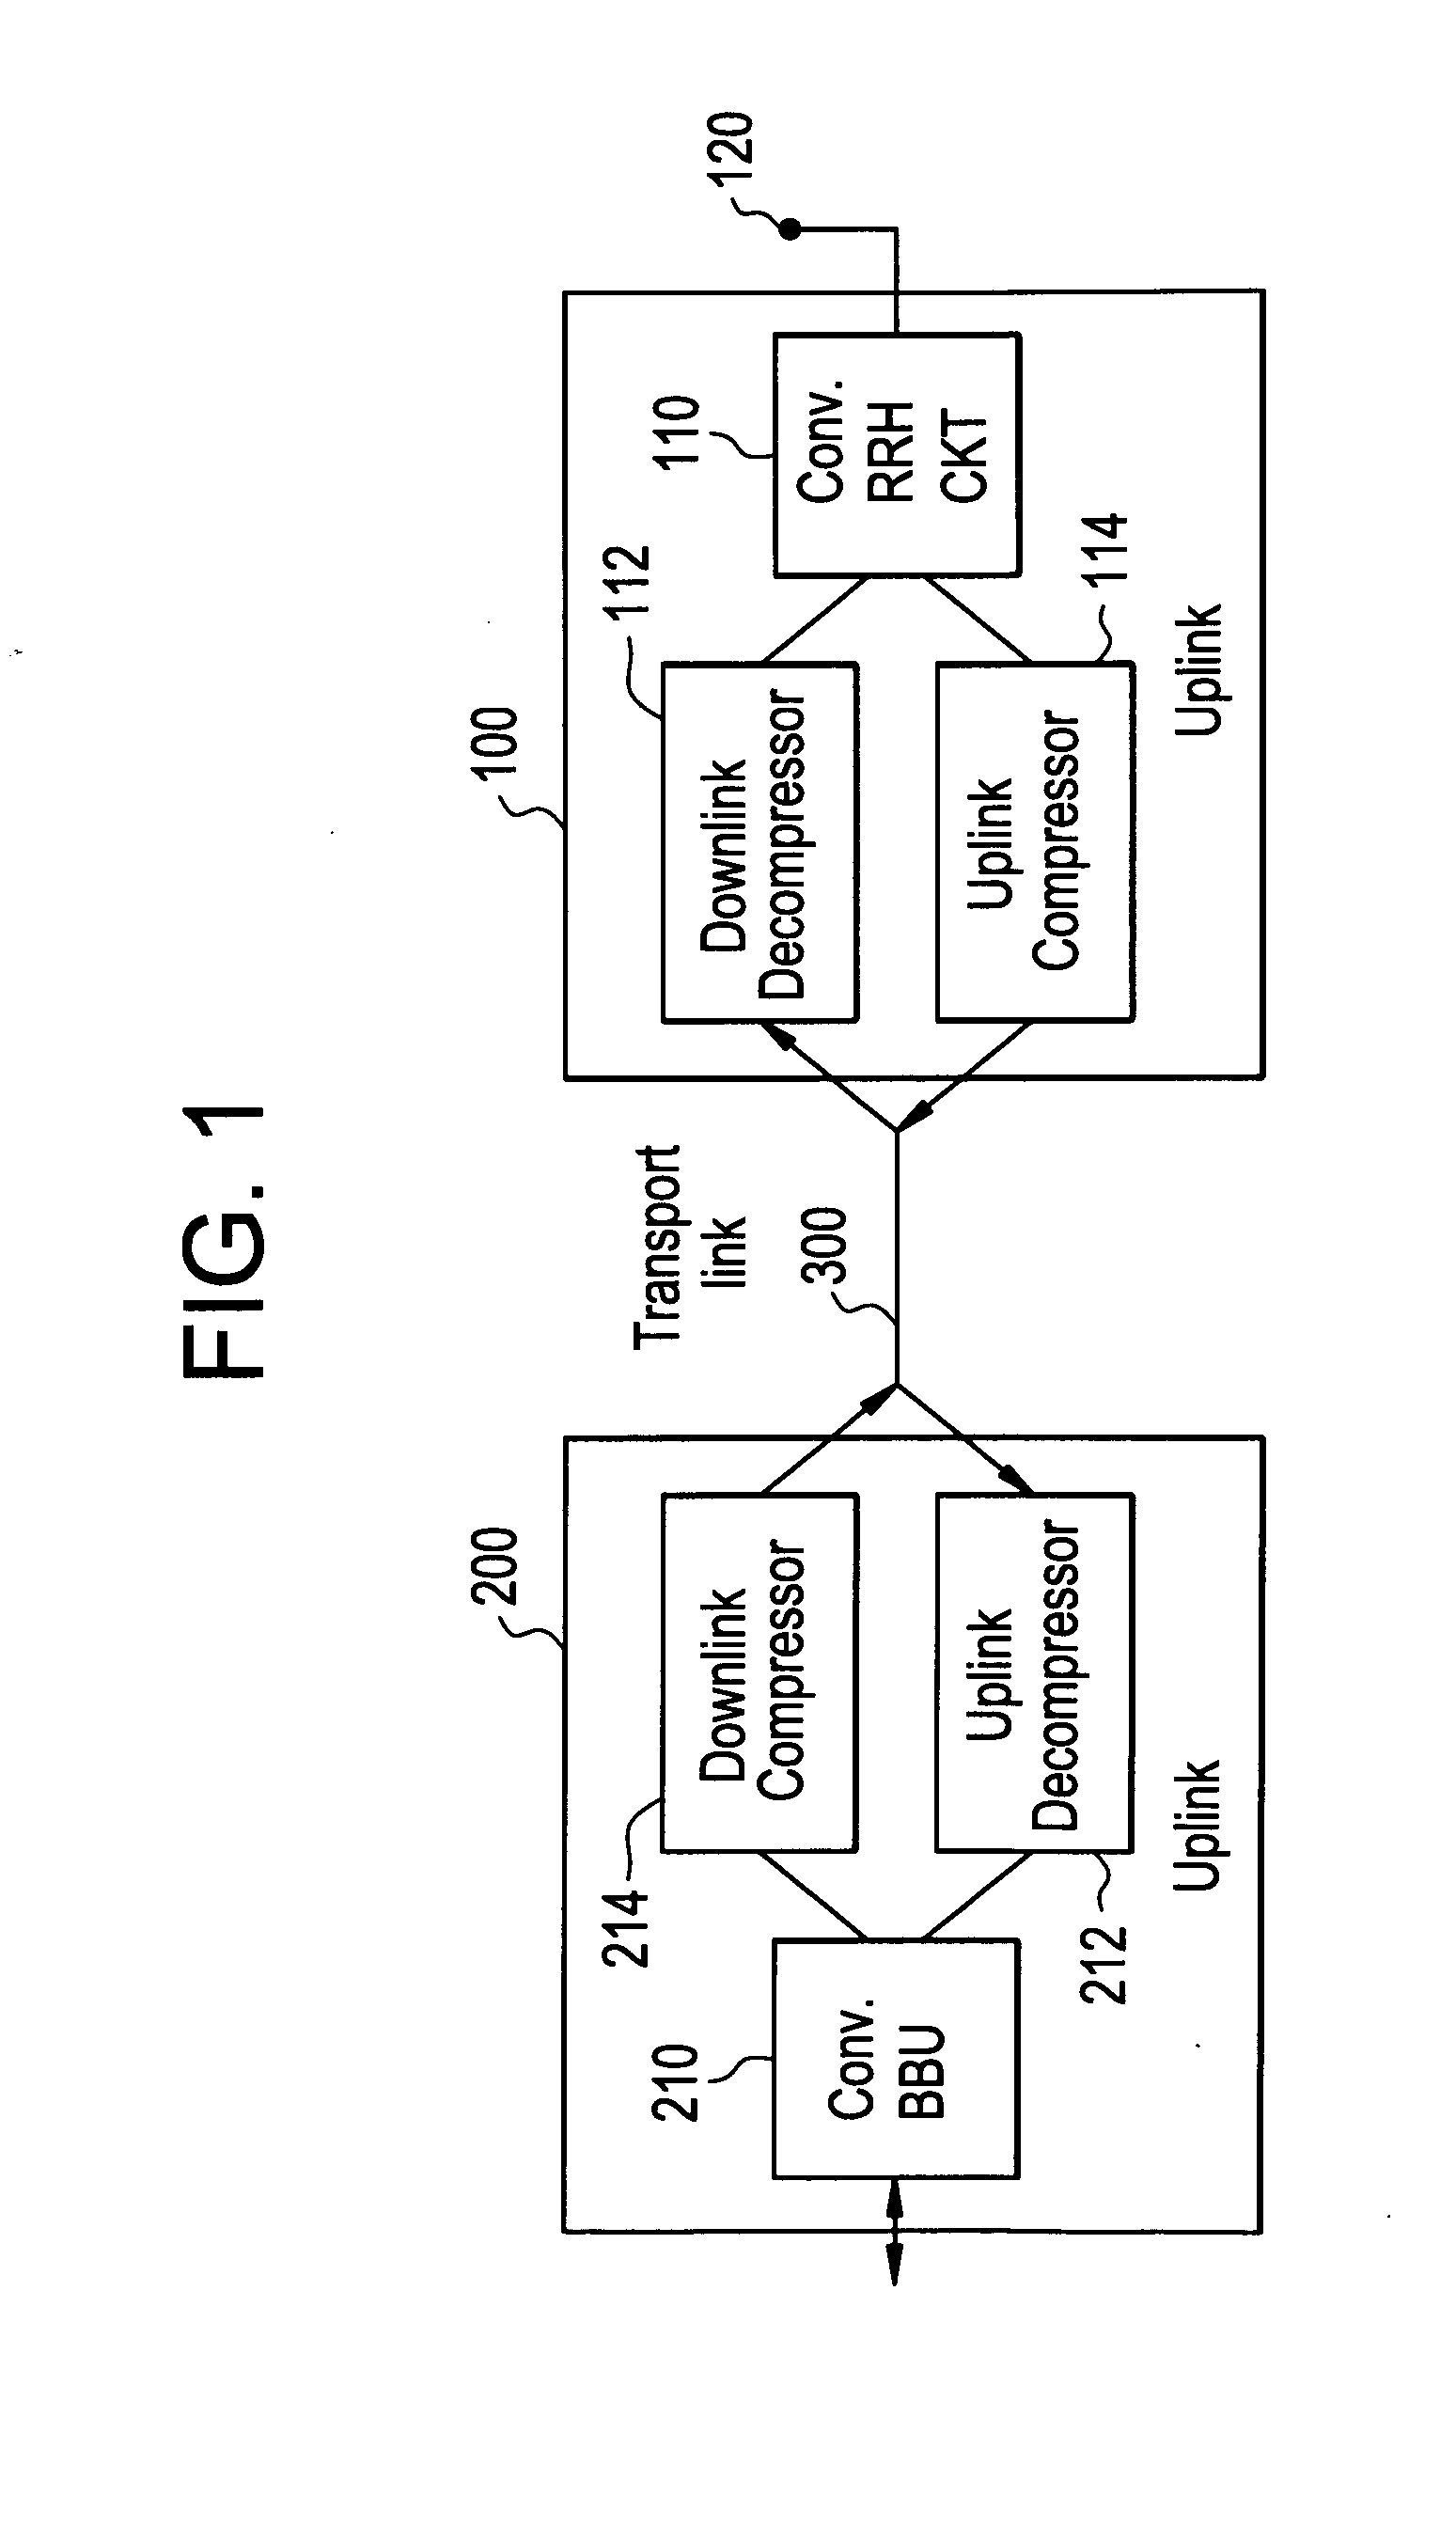 Method And Apparatus For Signal Compression And Decompression